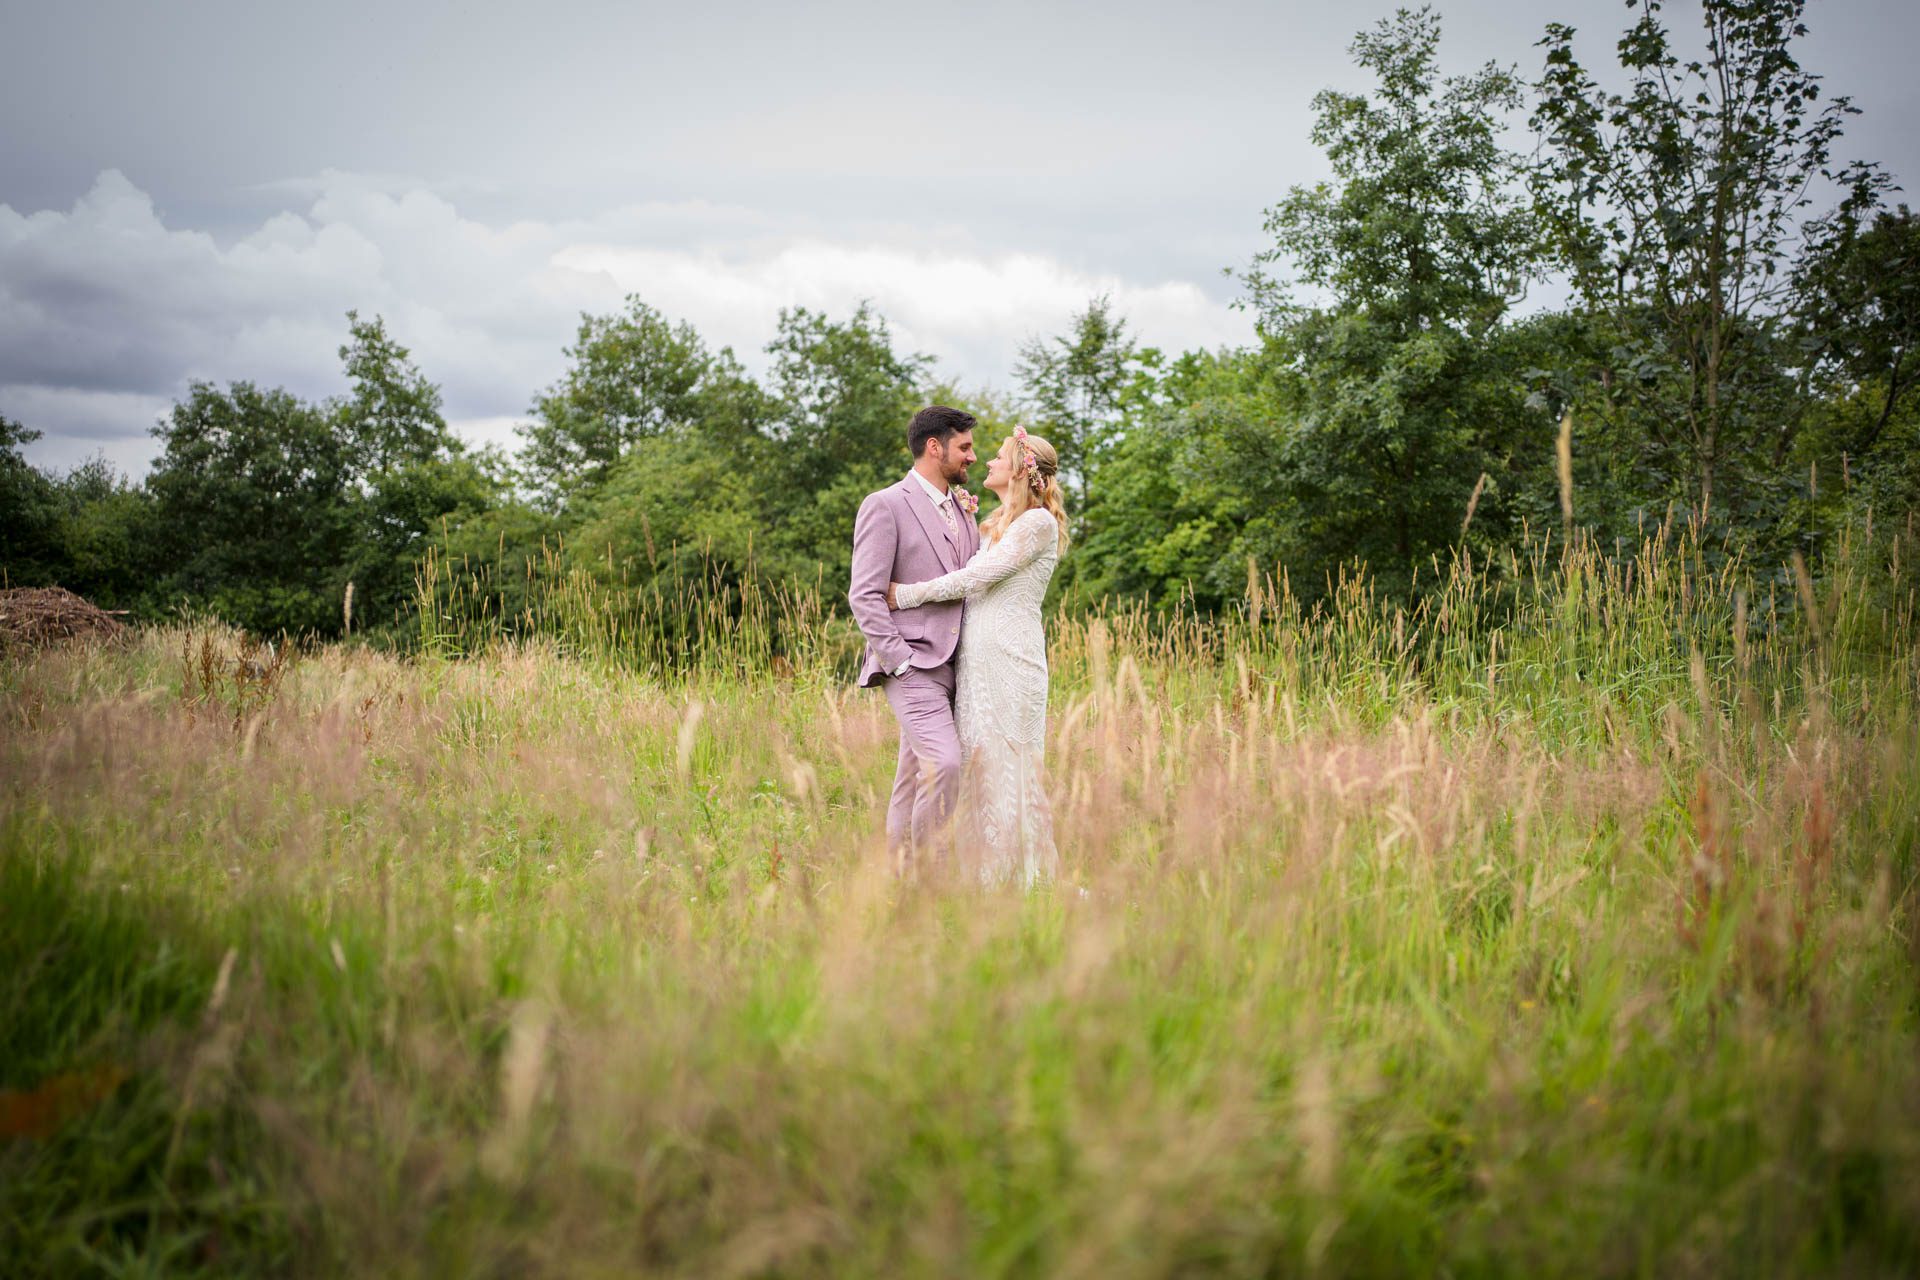 Wedding portrait at Ribble Valley wedding - bride and groom hugging in middle of field of long grass